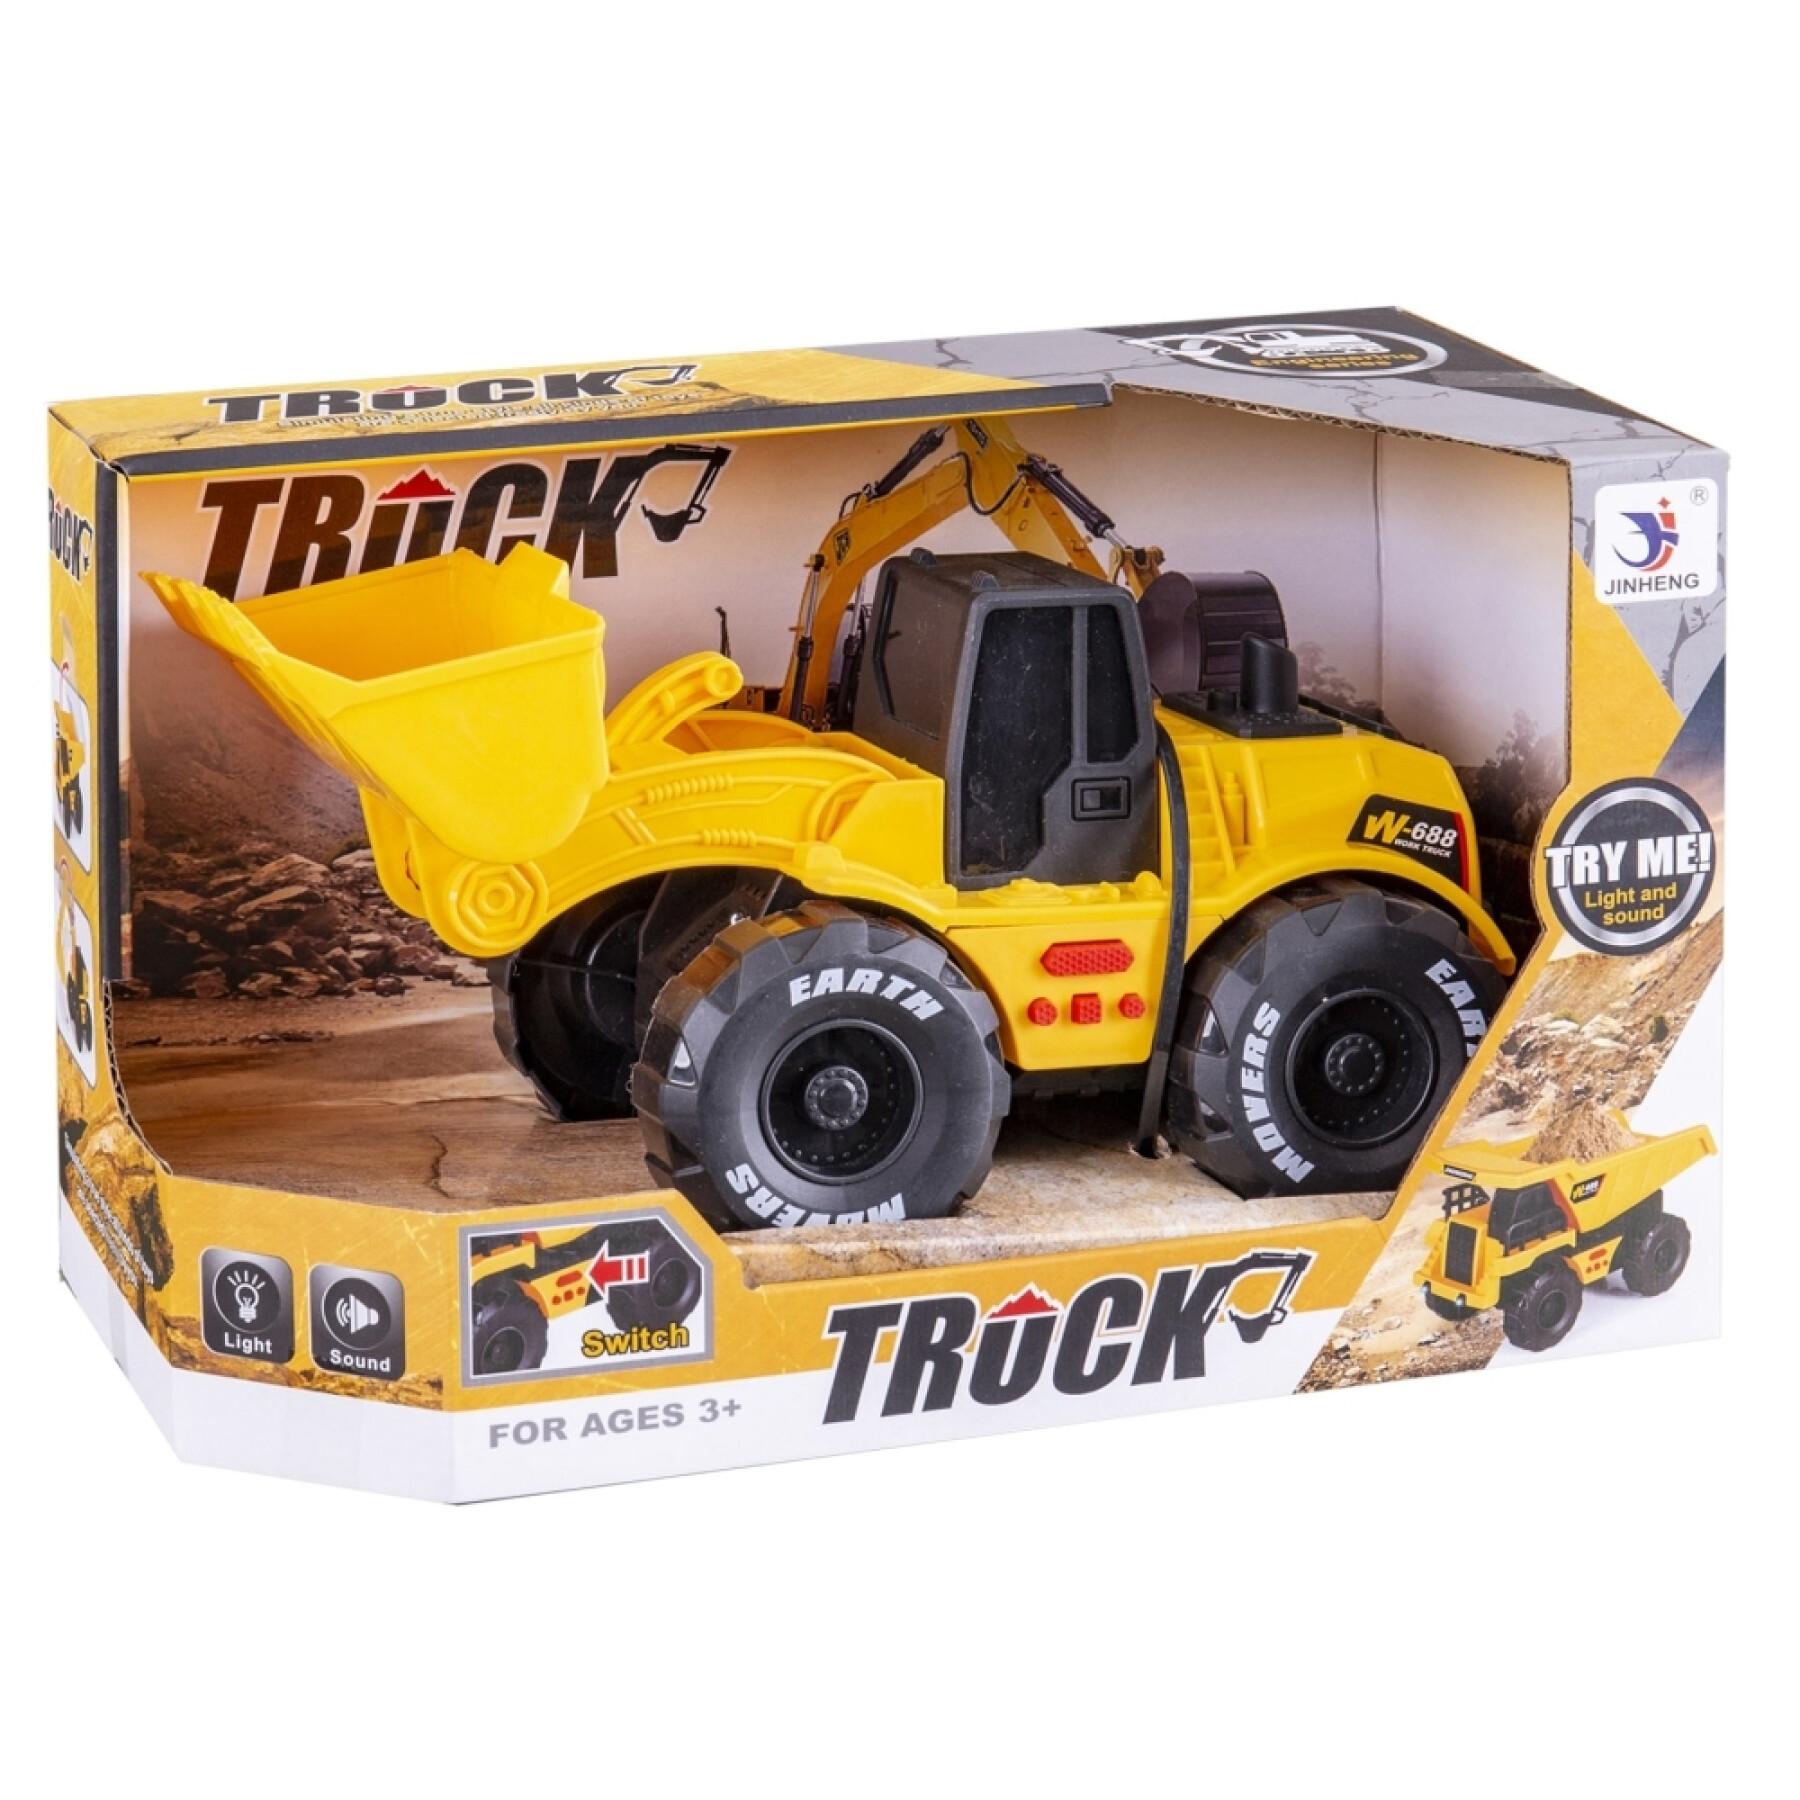 Friction excavator car games with sound and light Fantastiko 26 cm